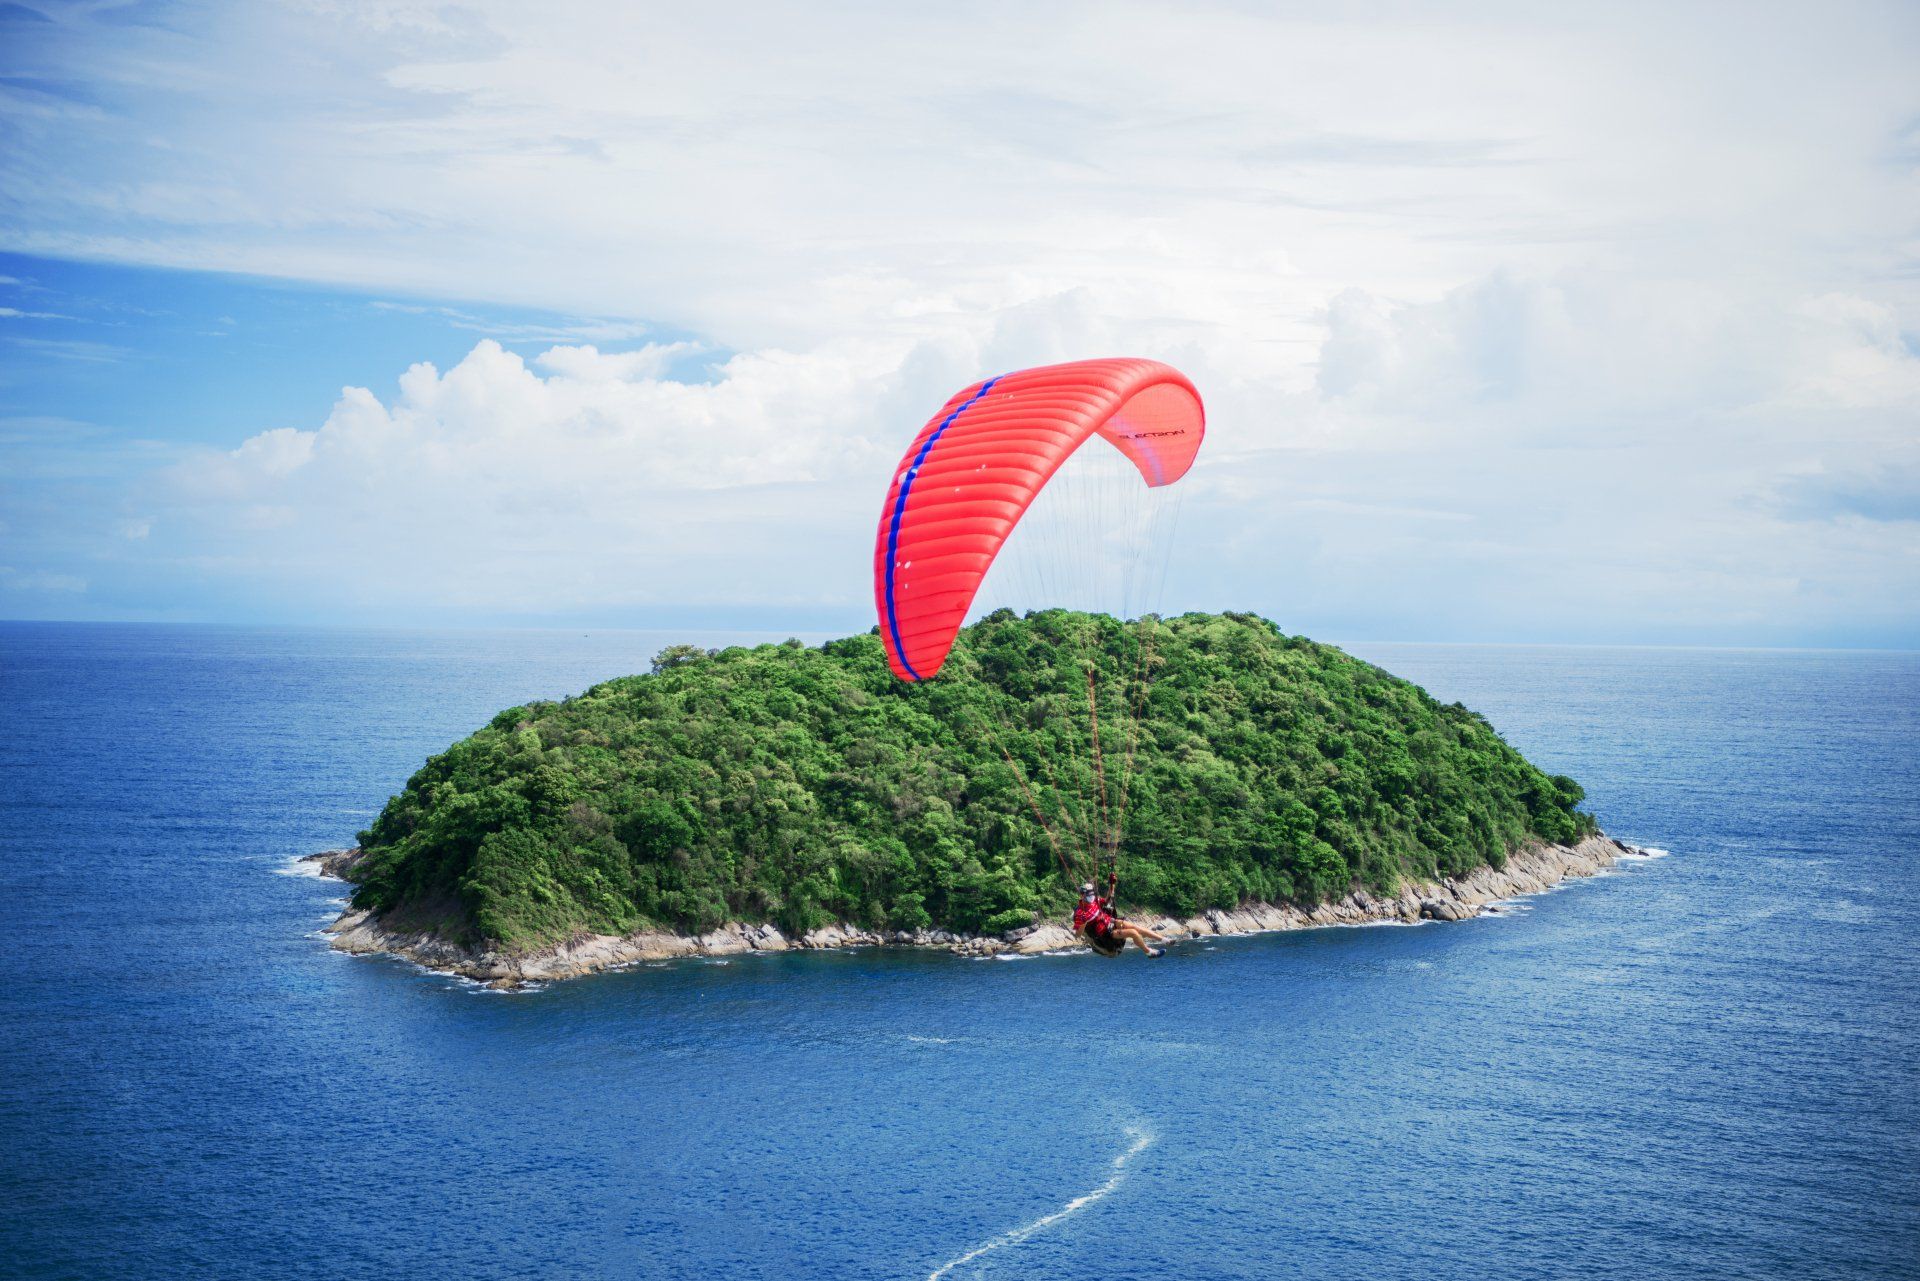 A person is parasailing over a small island in the middle of the ocean.